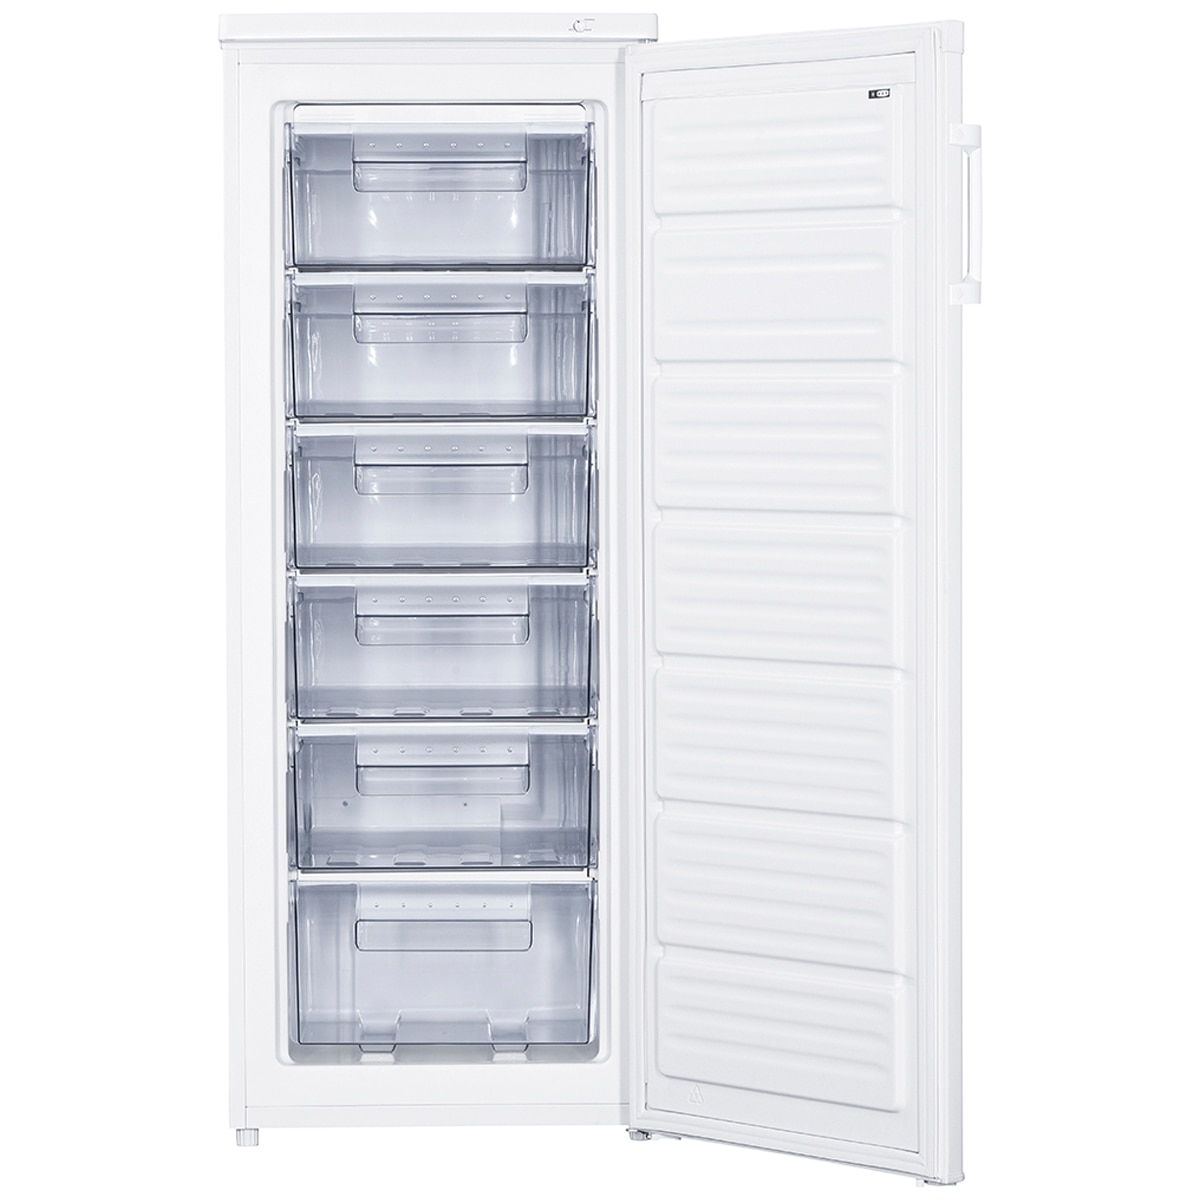 Costco Upright Freezer Drawers Get All You Need